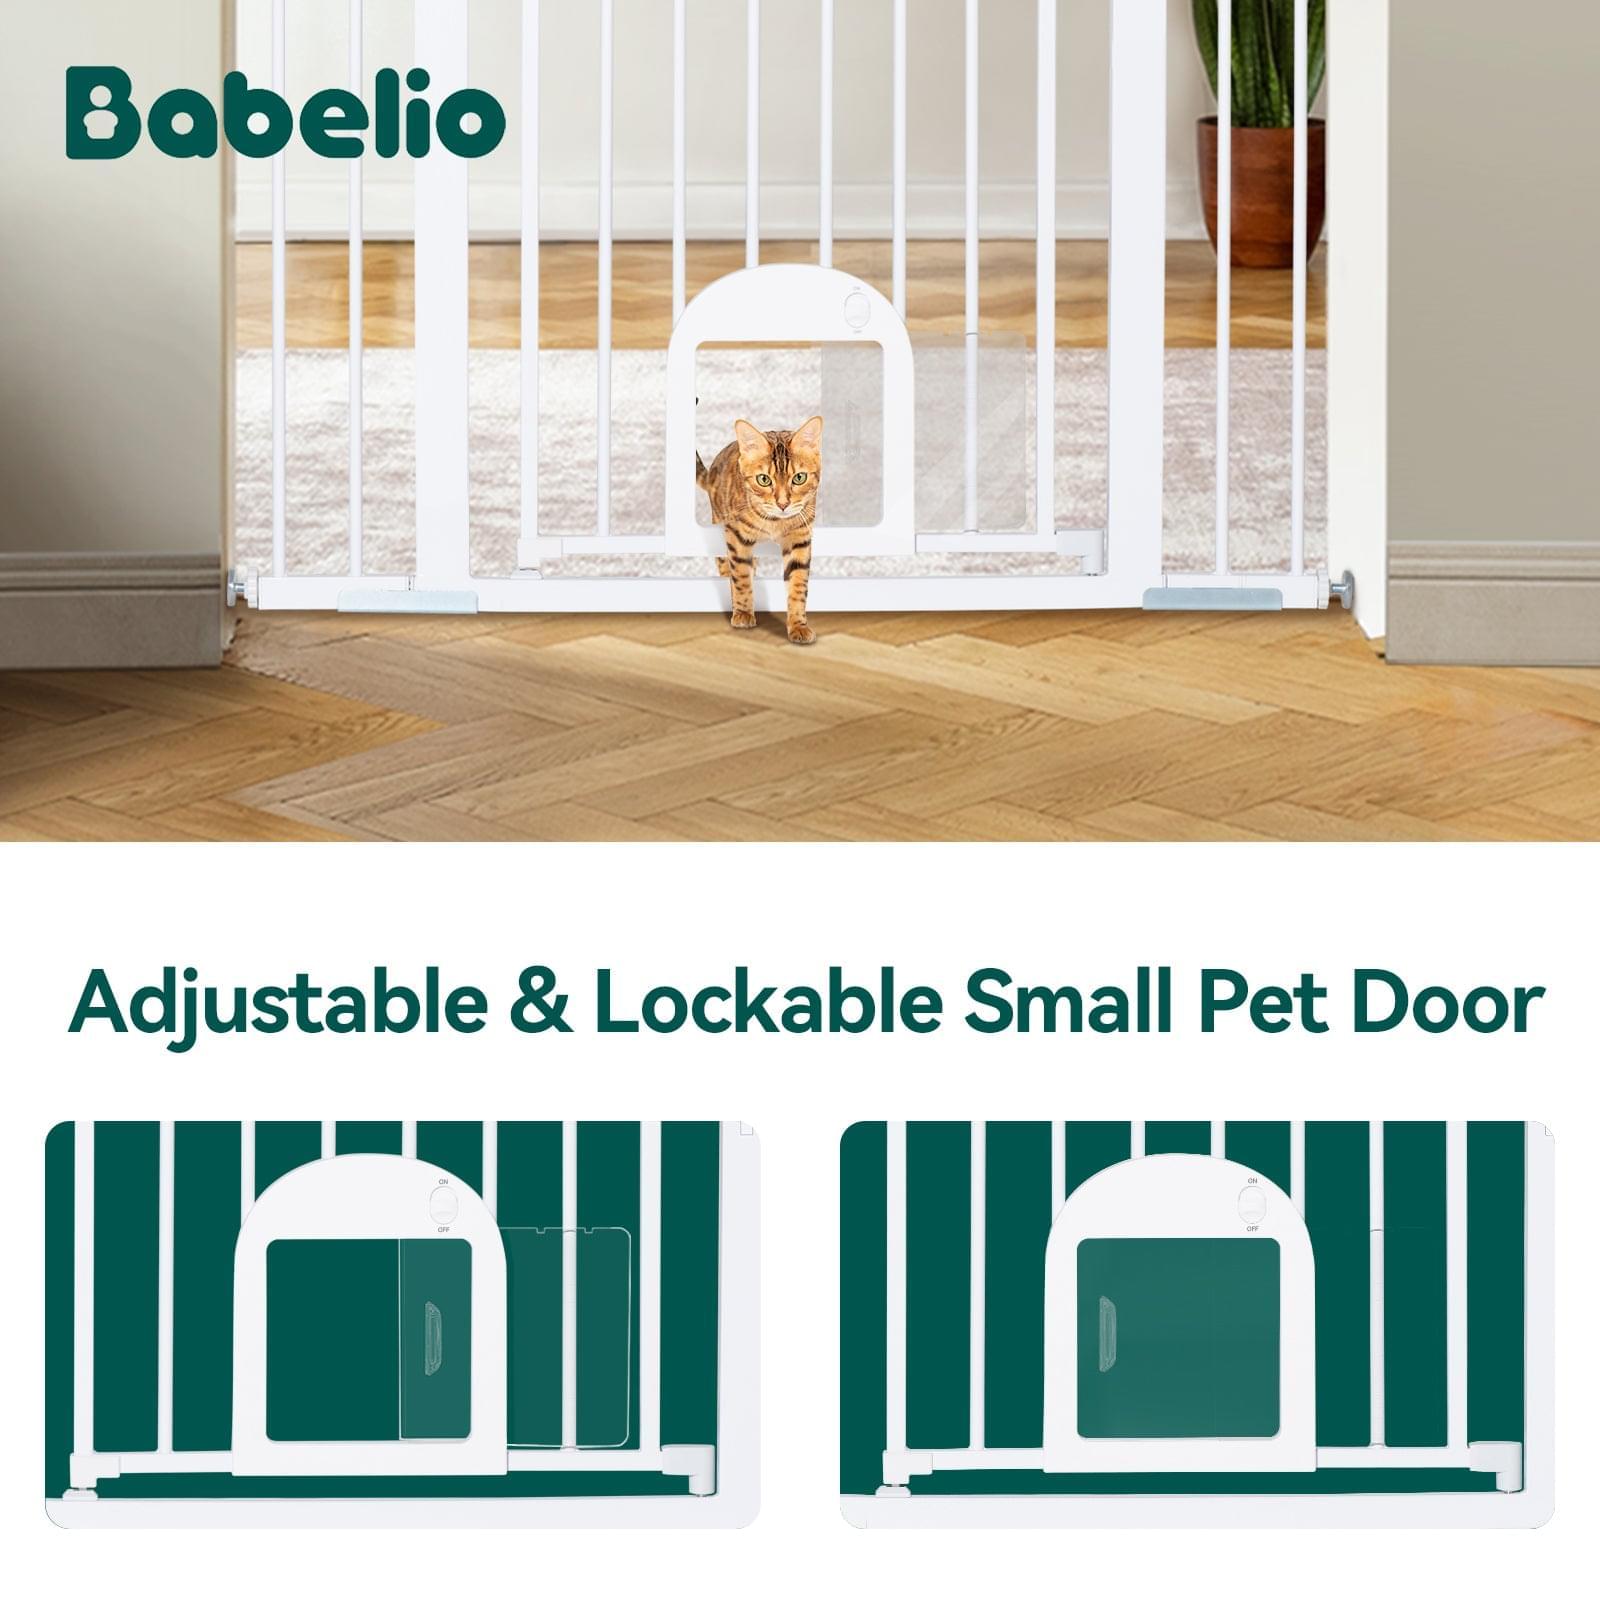 Babelio 29-48" Extra Wide Baby Gate with Adjustable Cat Door, Easy Install Pressure/Hardware Mounted Dog Gates for The House - babeliobaby